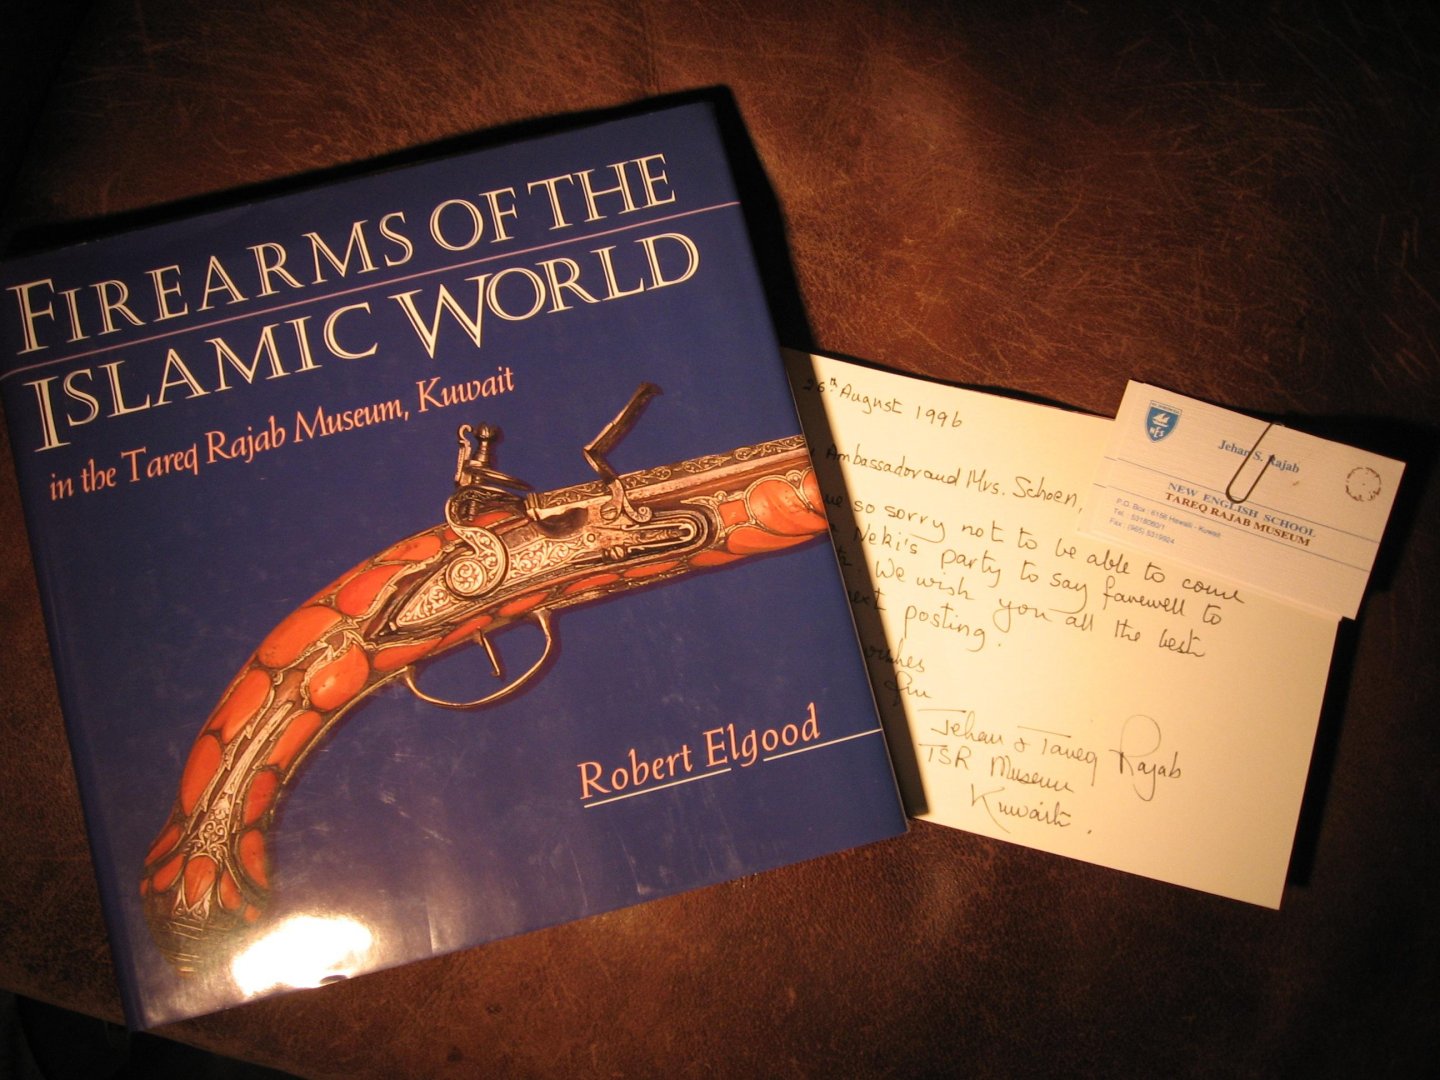 Elgood, R. - Firearms of the Islamic World in the Tareq Rajab Museum Kuwait.